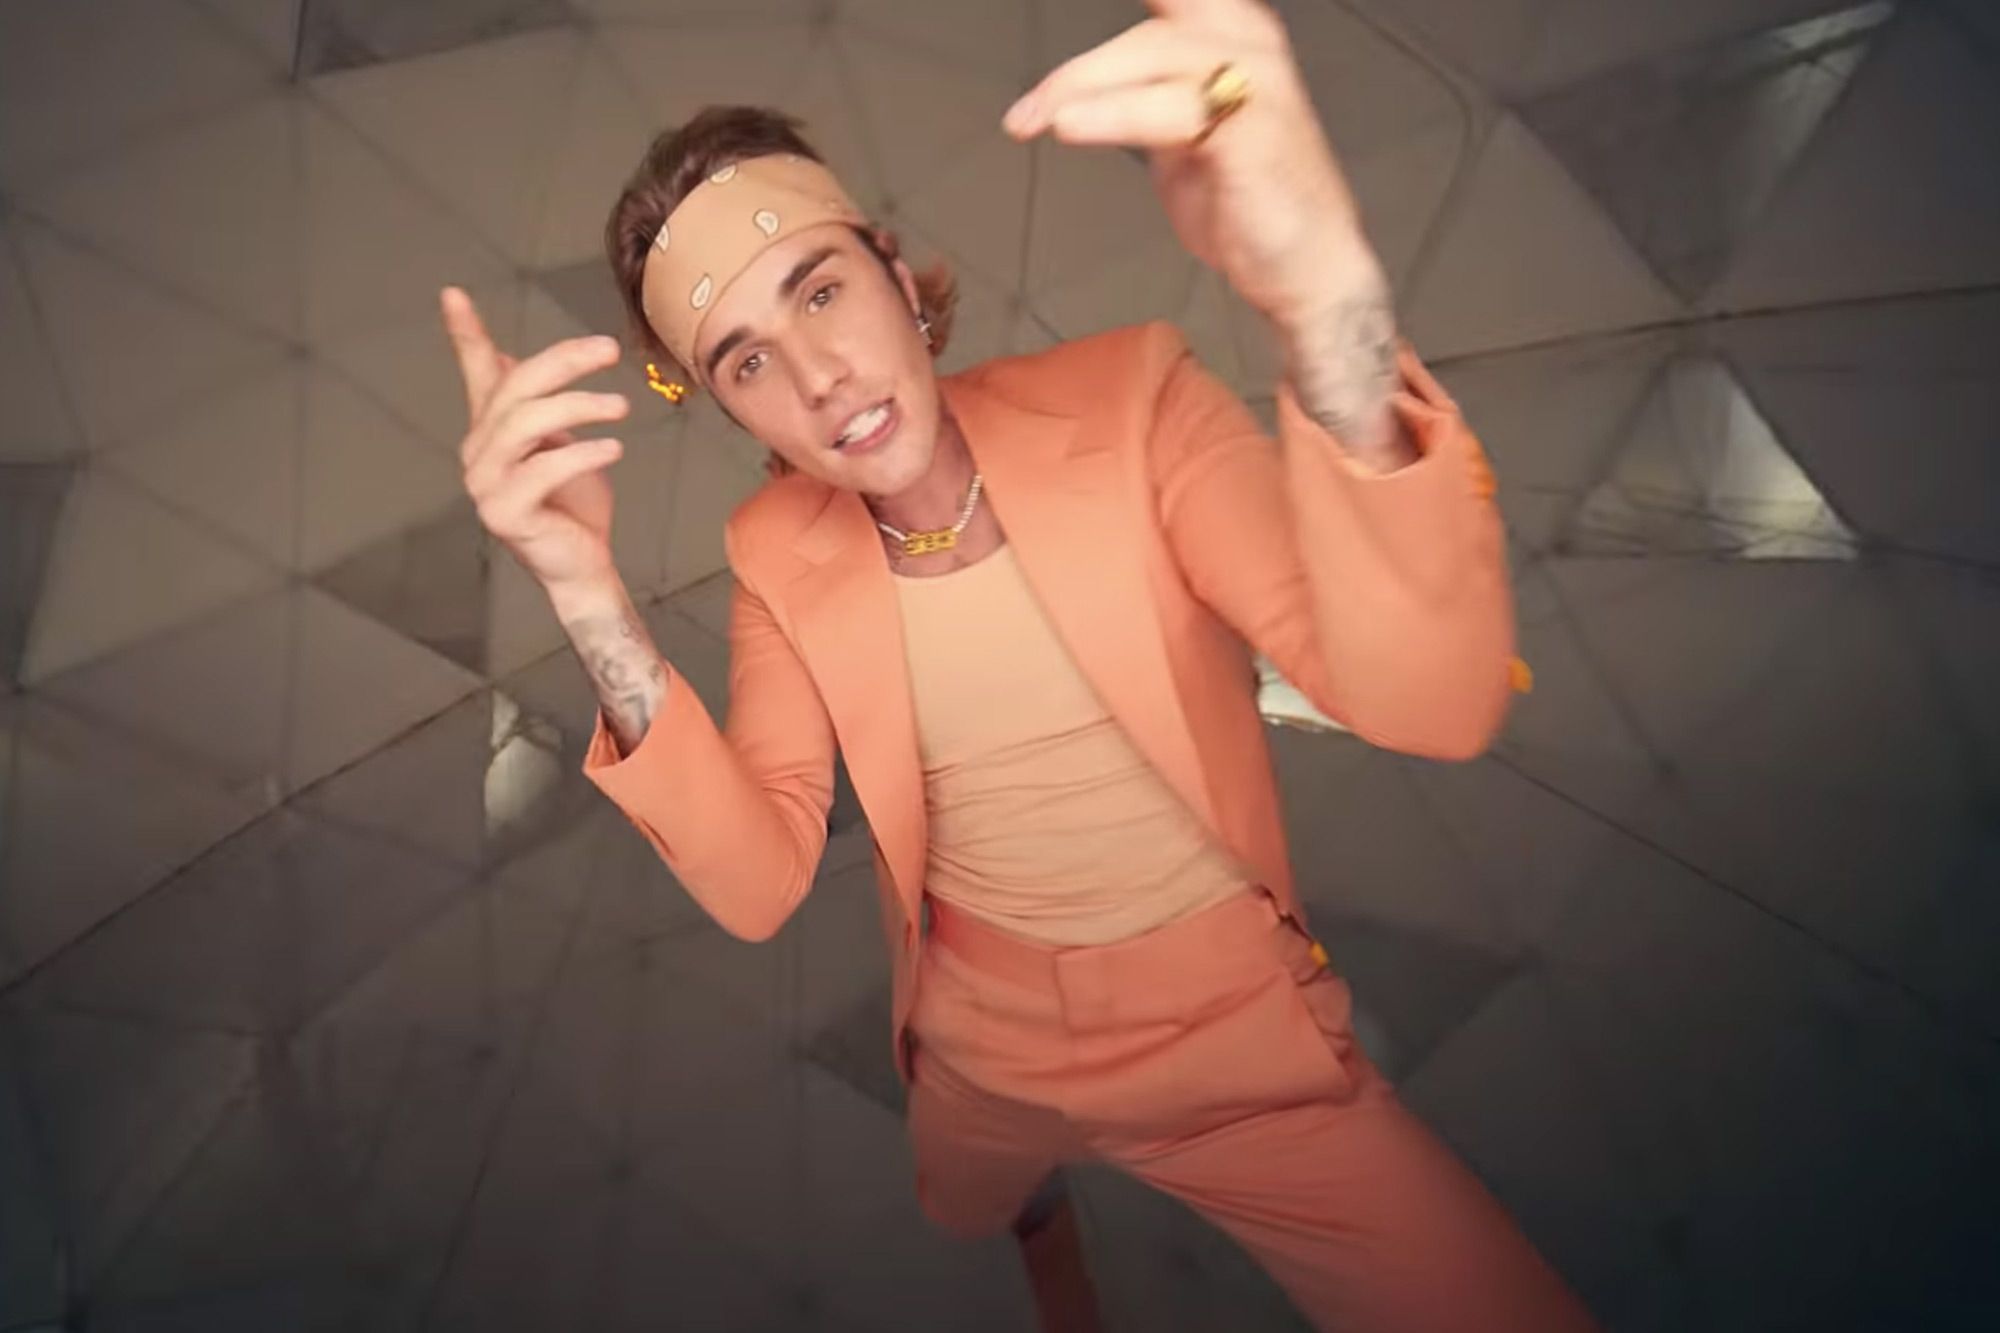 Justin Bieber dresses on theme for new 'Peaches' music video